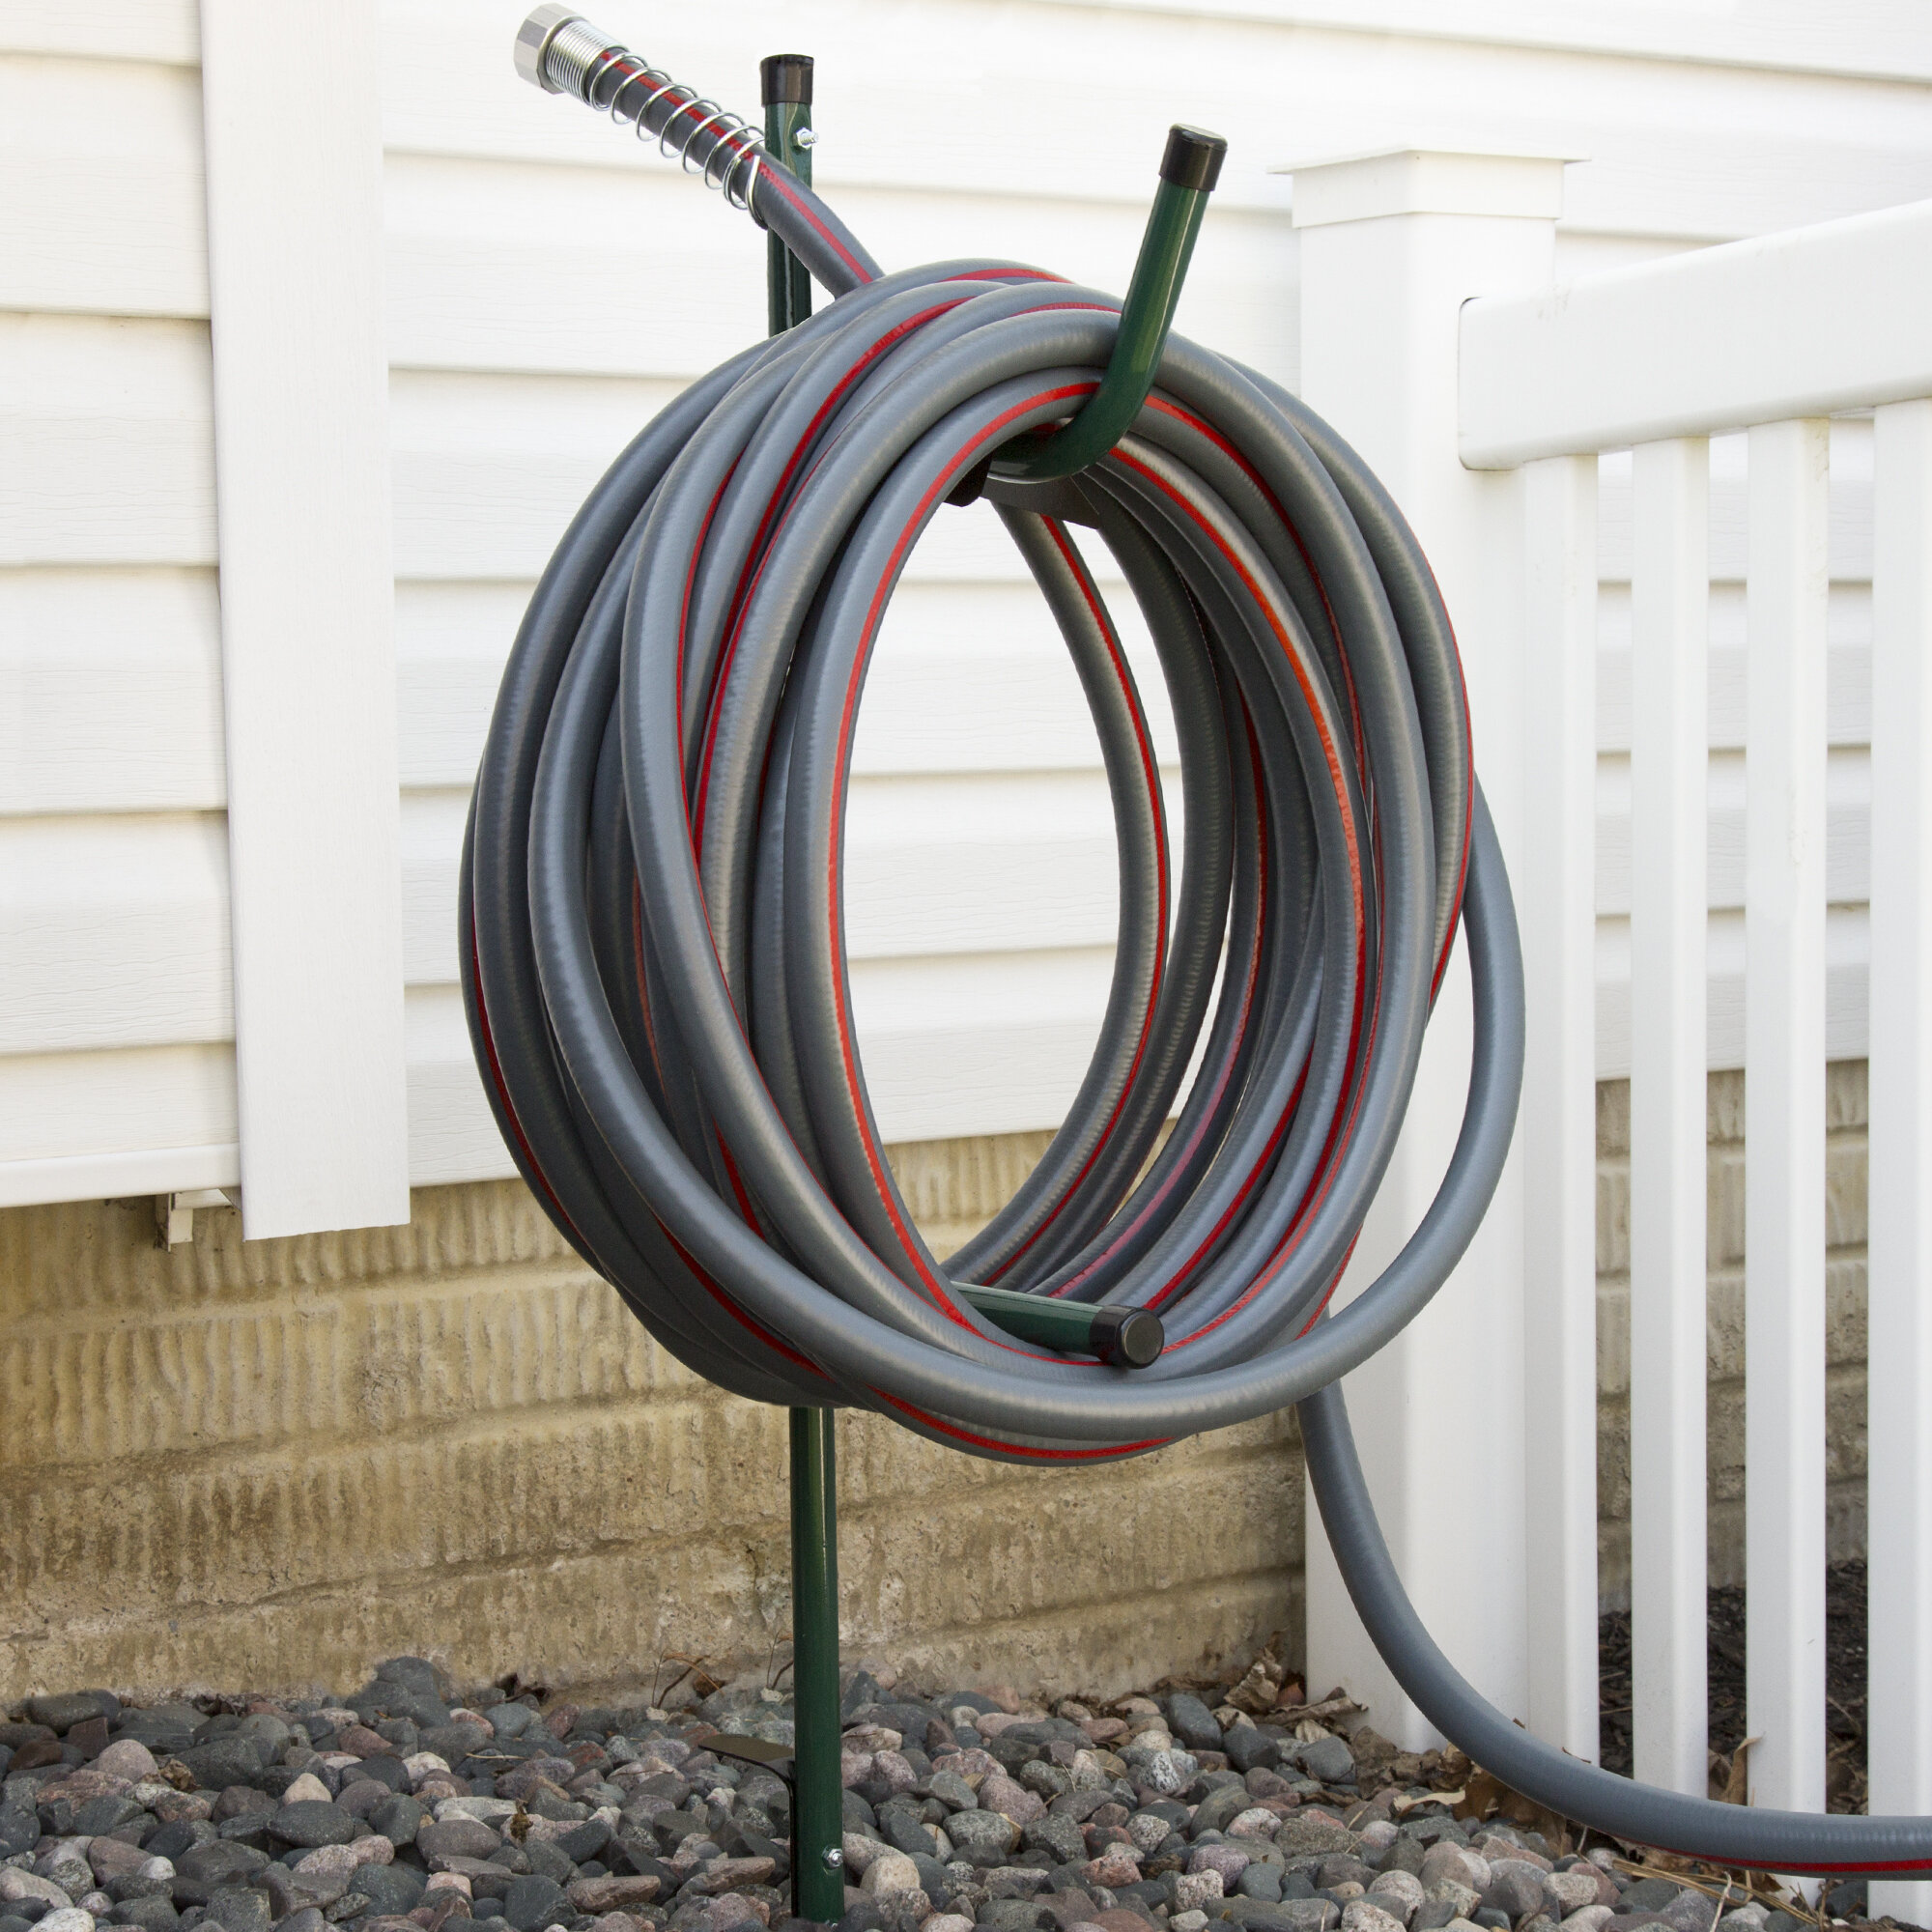 Stalwart Water Hose Holder - Easy-to-Install Garden Hose Storage Metal Rack  with Stake - Outdoor Hose Reel & Reviews